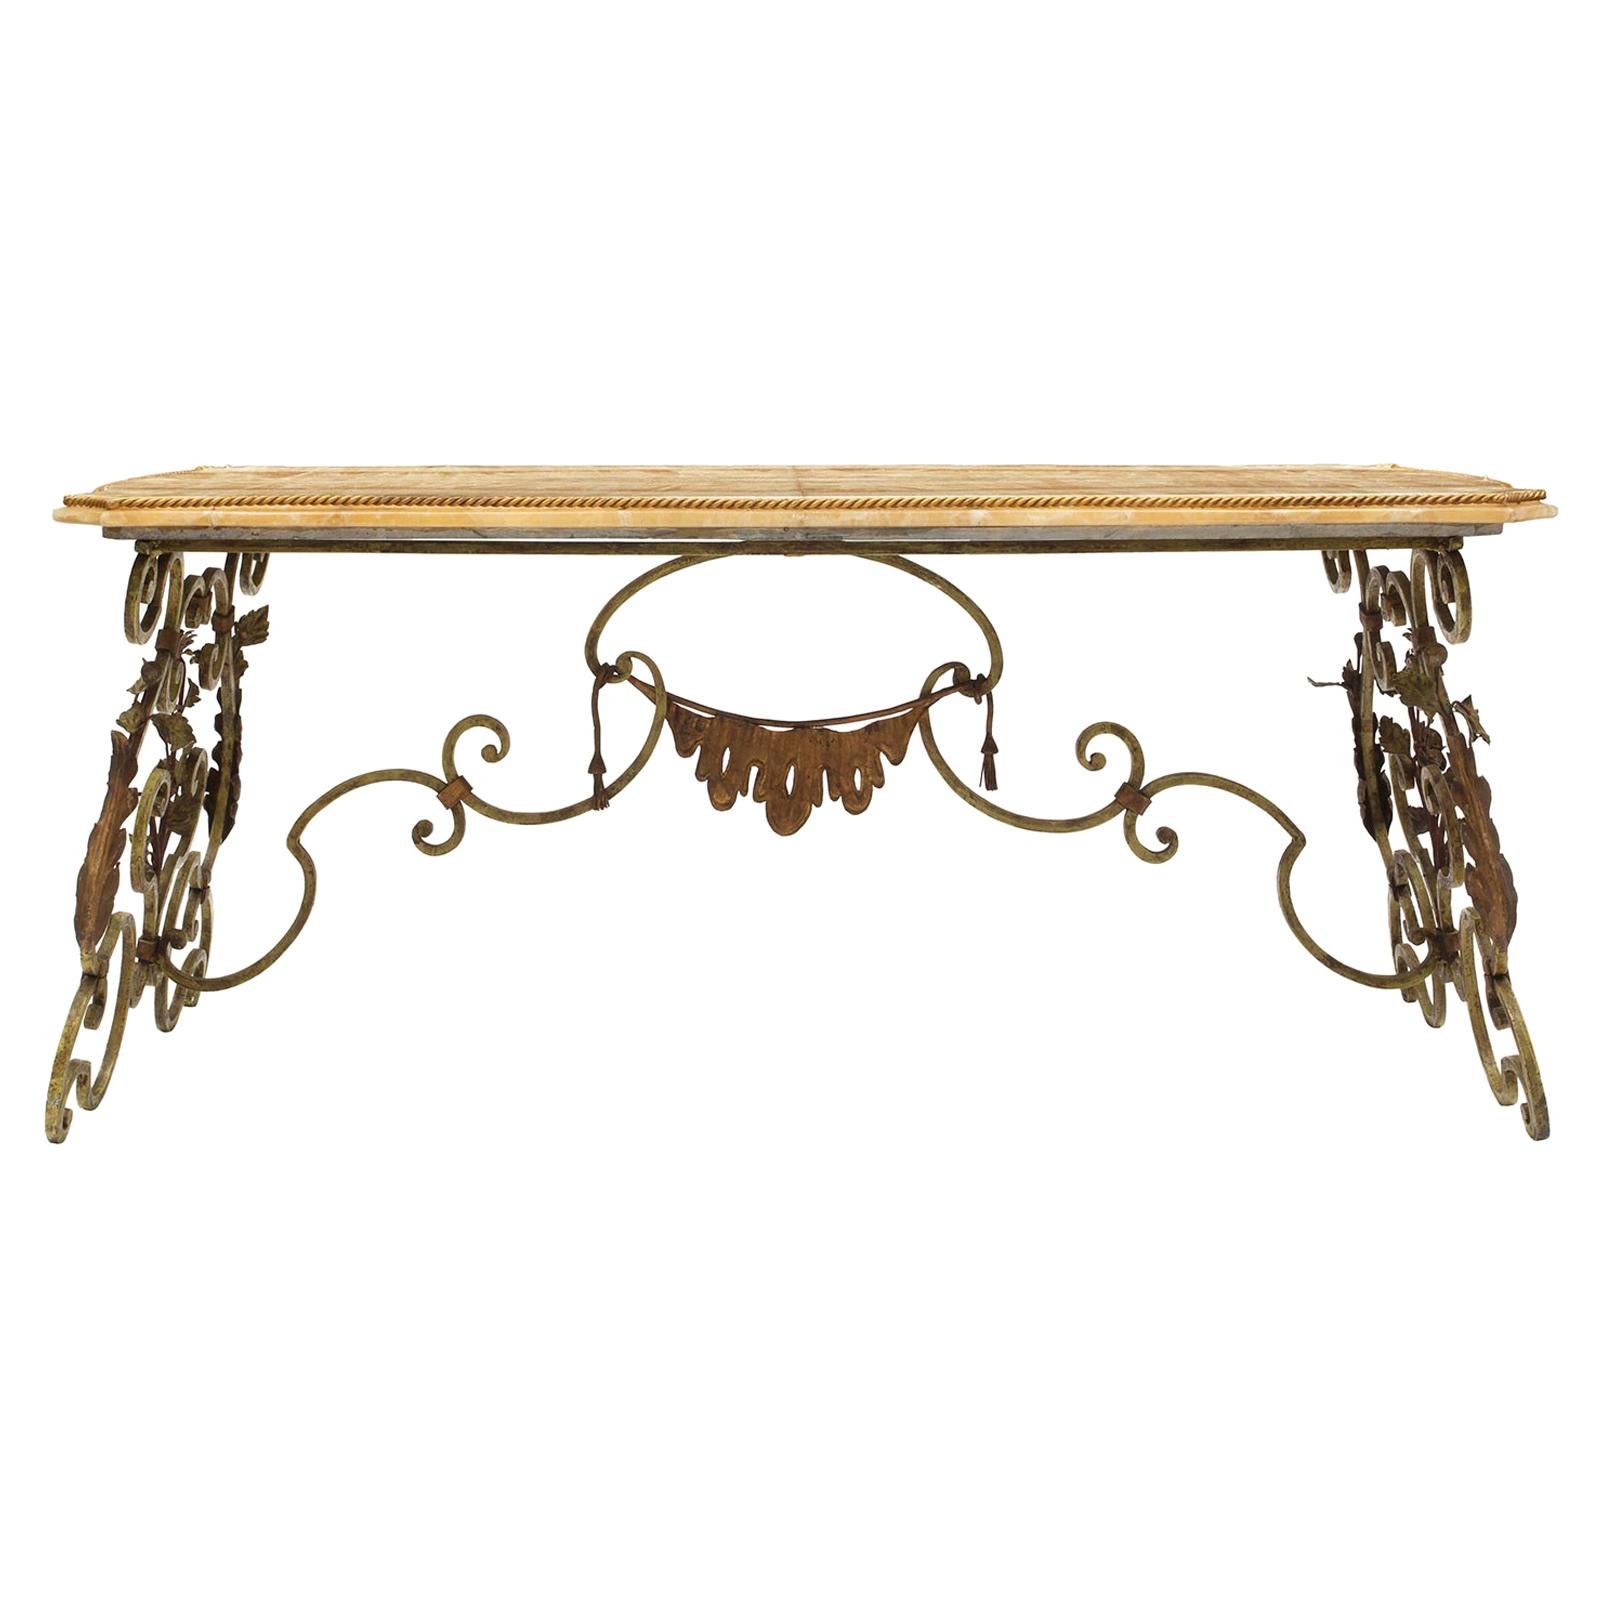 Italian 19th Century Patinated, Gilt Metal and Onyx Coffee Table